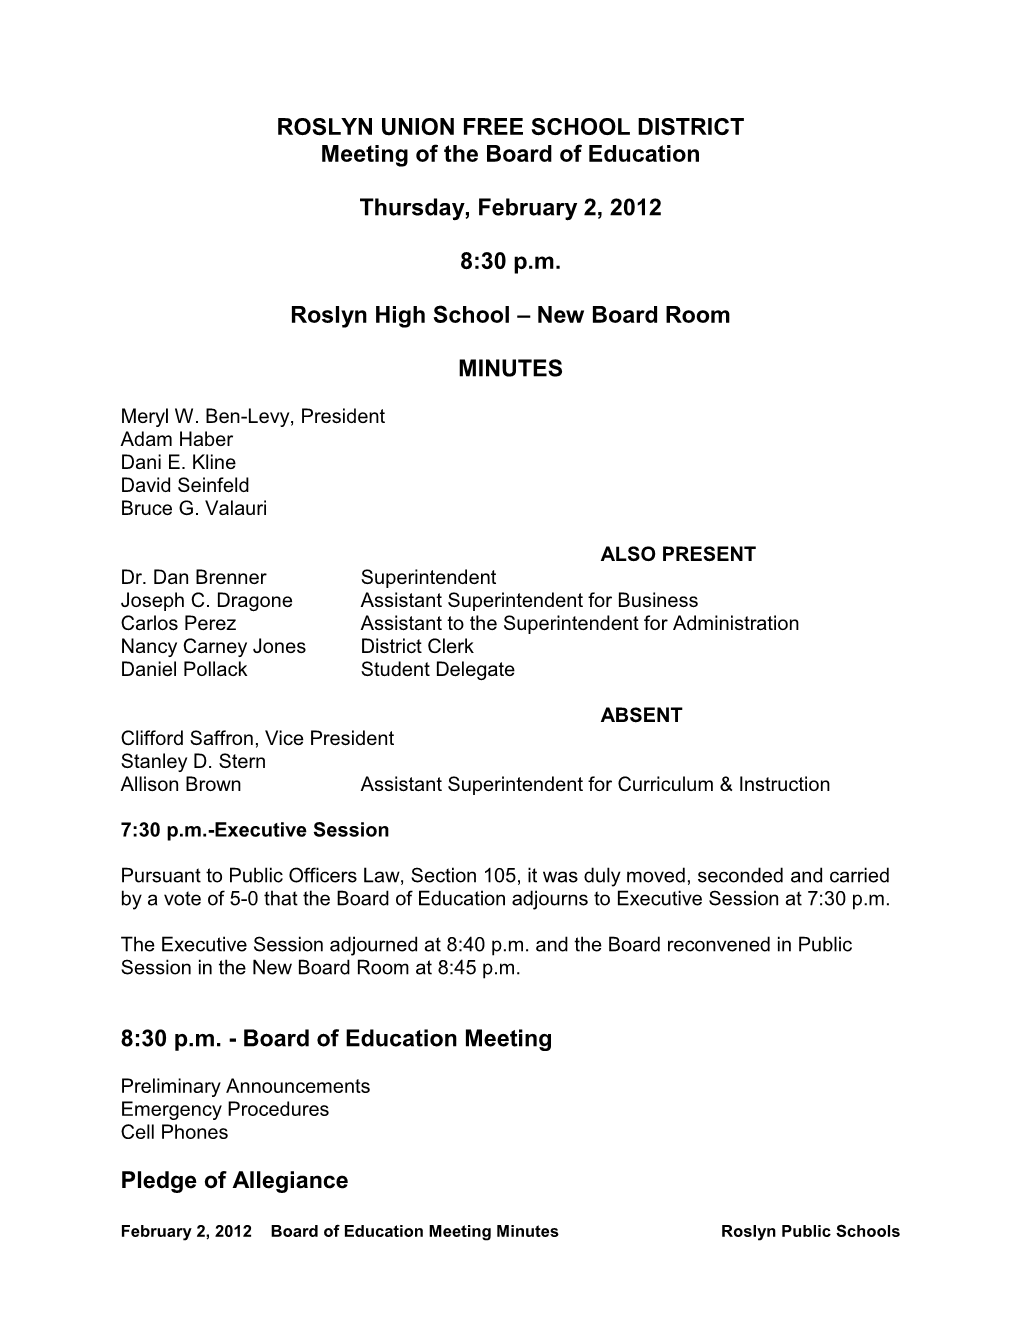 ROSLYN UNION FREE SCHOOL DISTRICT Meeting of the Board of Education